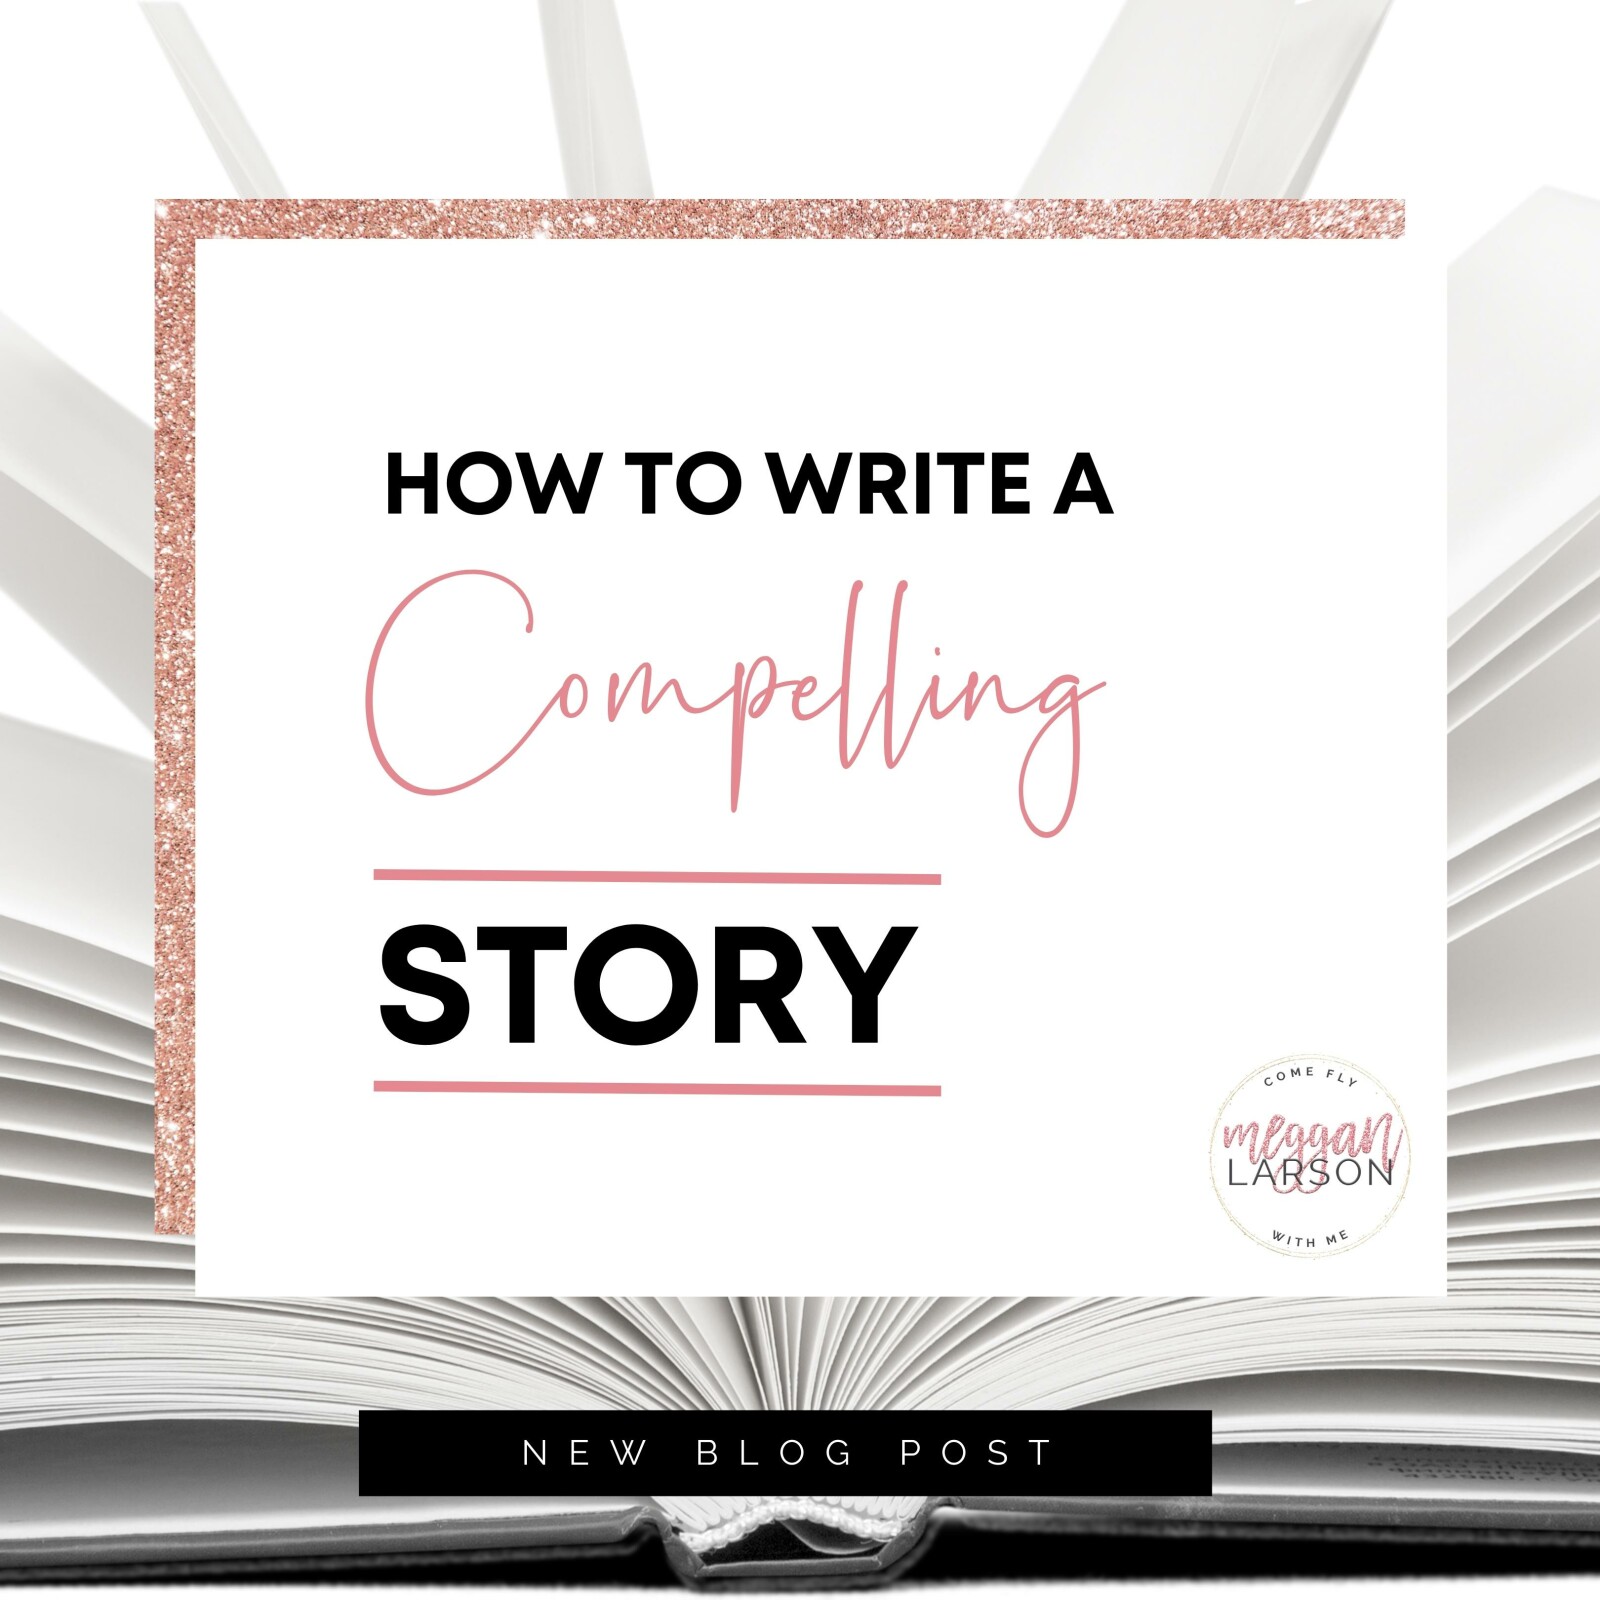 How to Write a Compelling Story